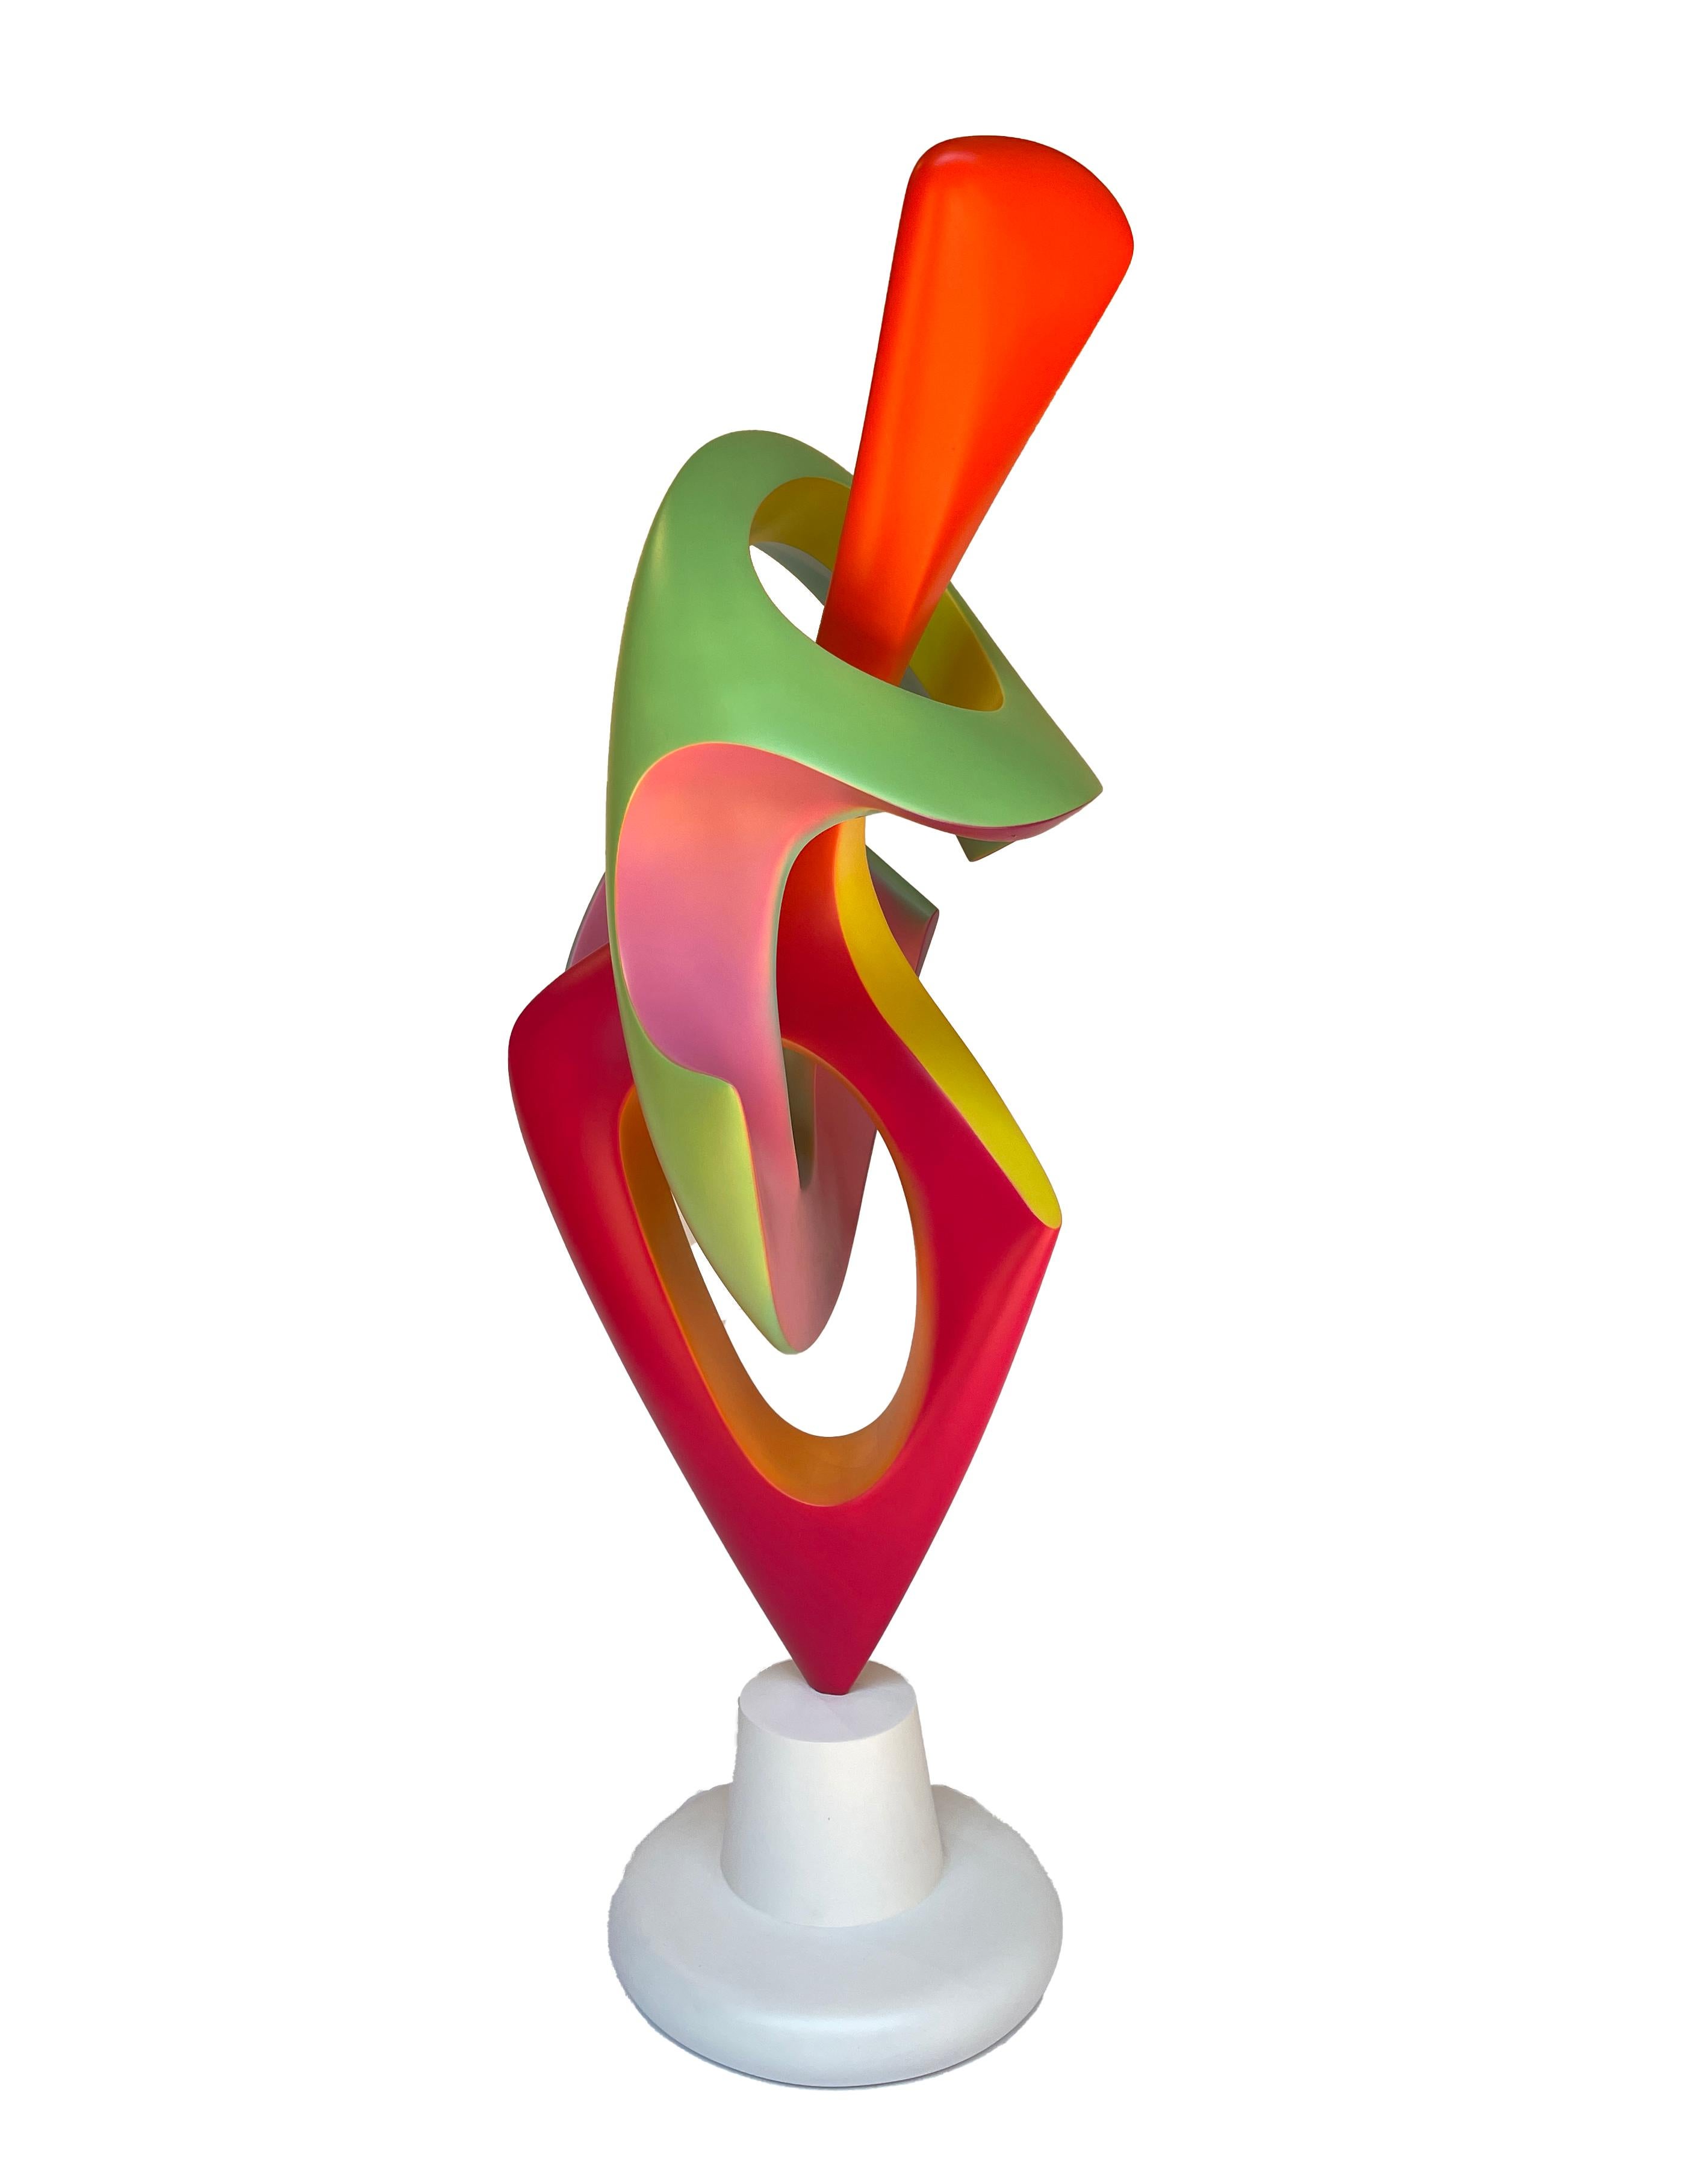  Apocalypse- Abstract Sculpture, Brightly Colored Geometric Intertwined Form